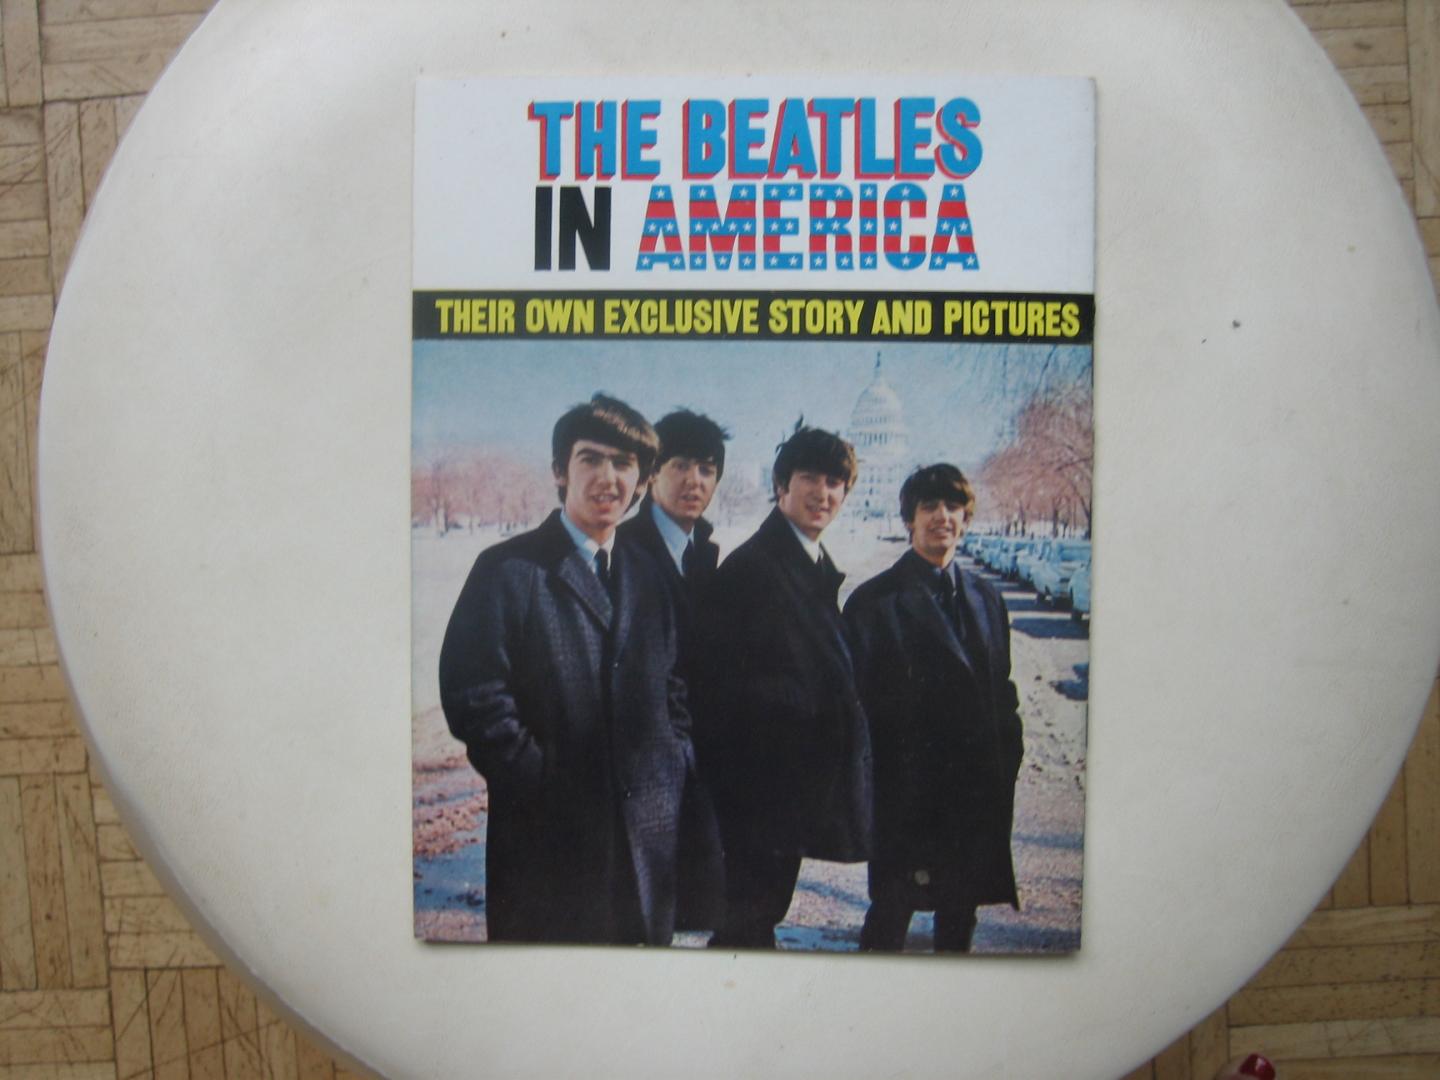 The Beatles - The Beatles in America / Their own exclusive story and pictures